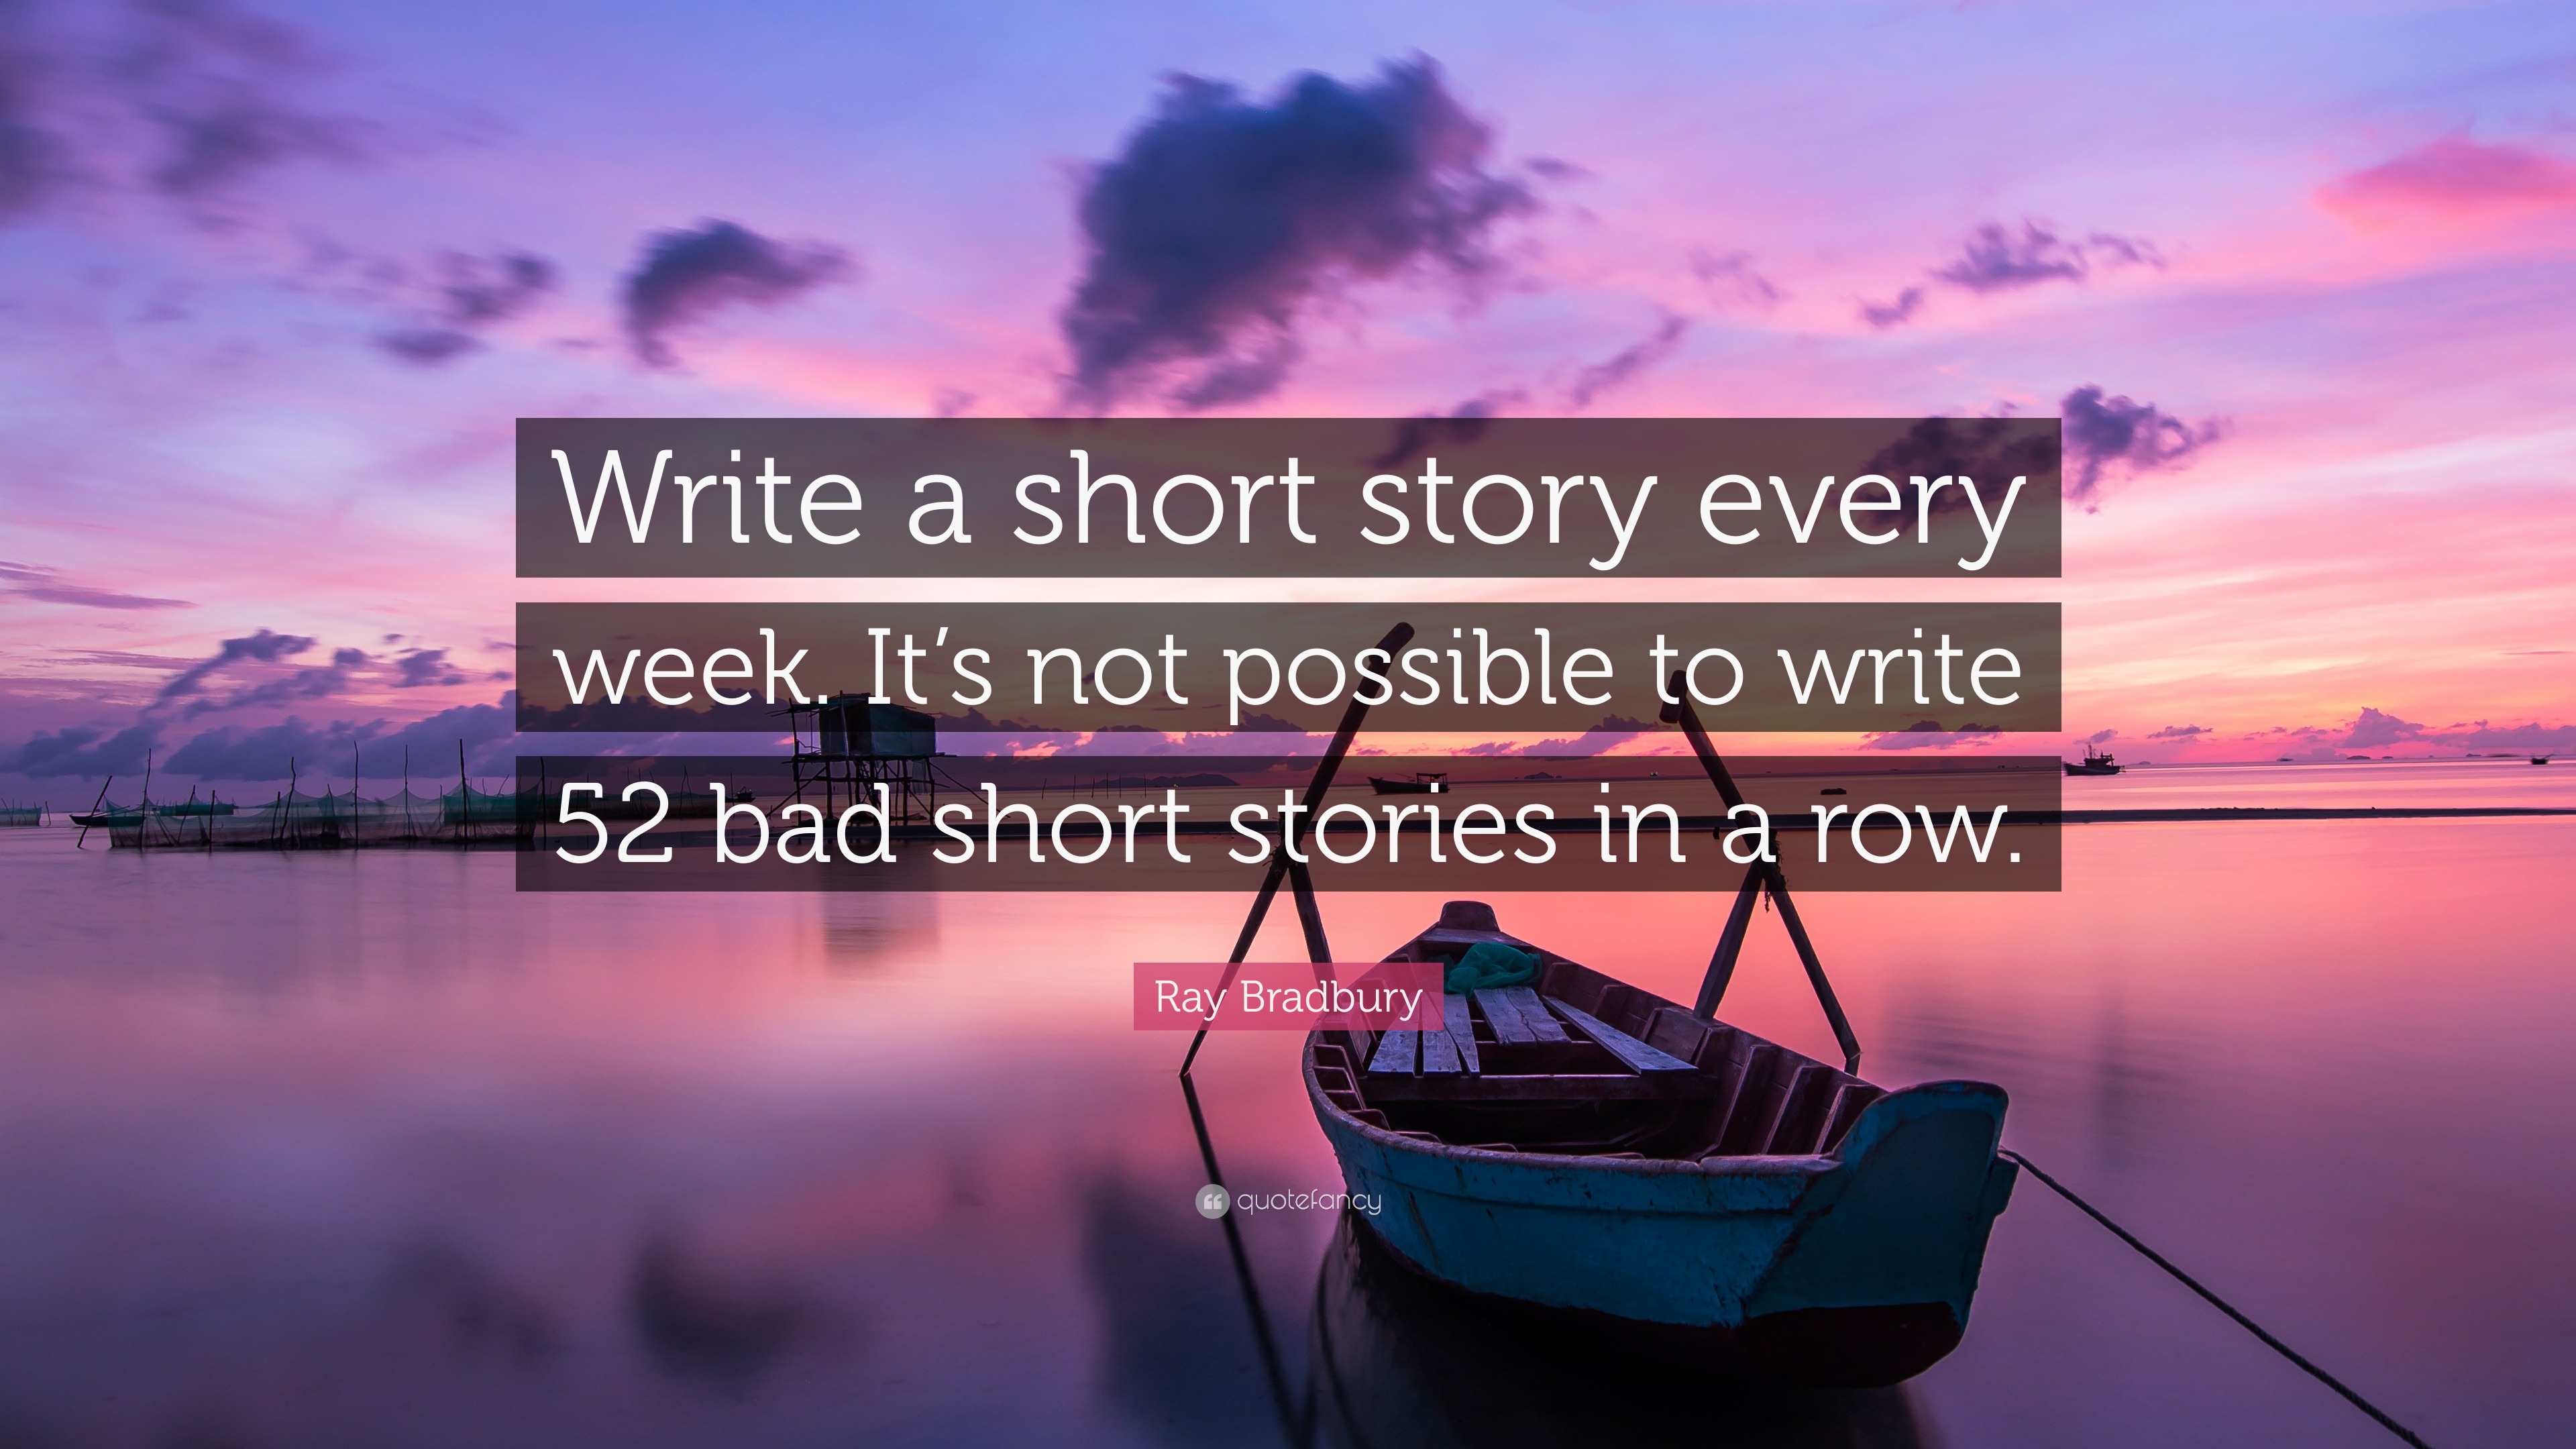 Ray Bradbury Quote: “Write a short story every week. It’s not possible